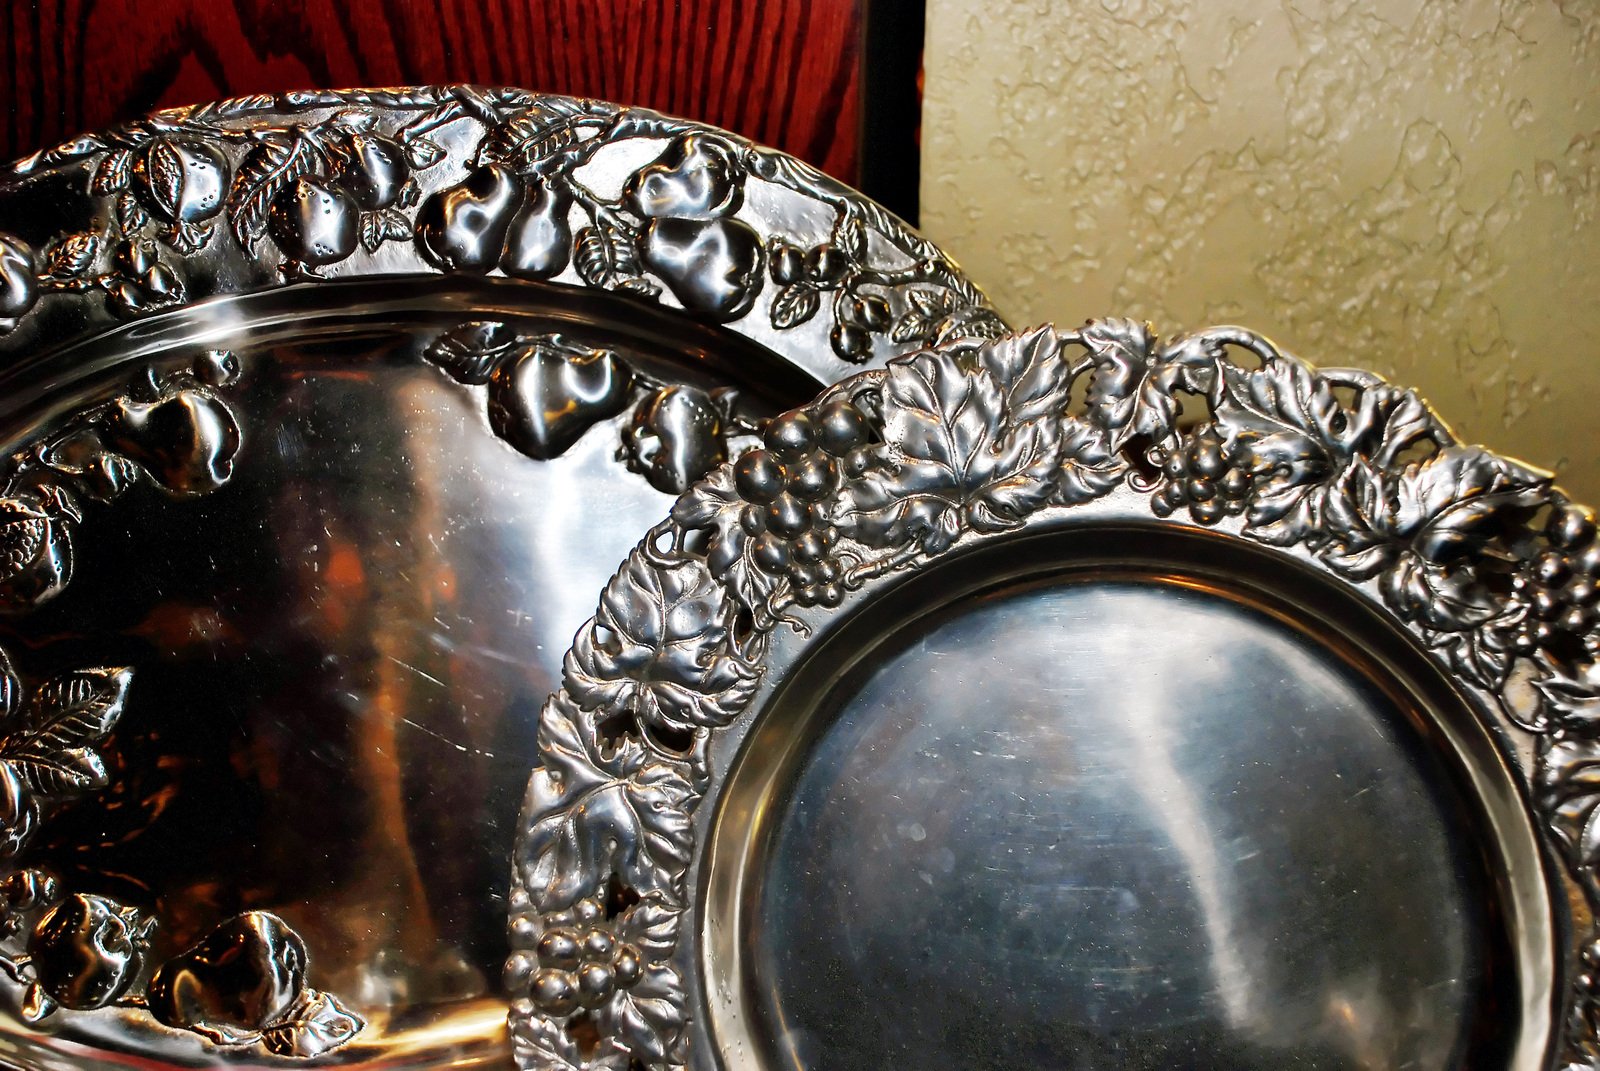 two decorative metal plates sitting on a table